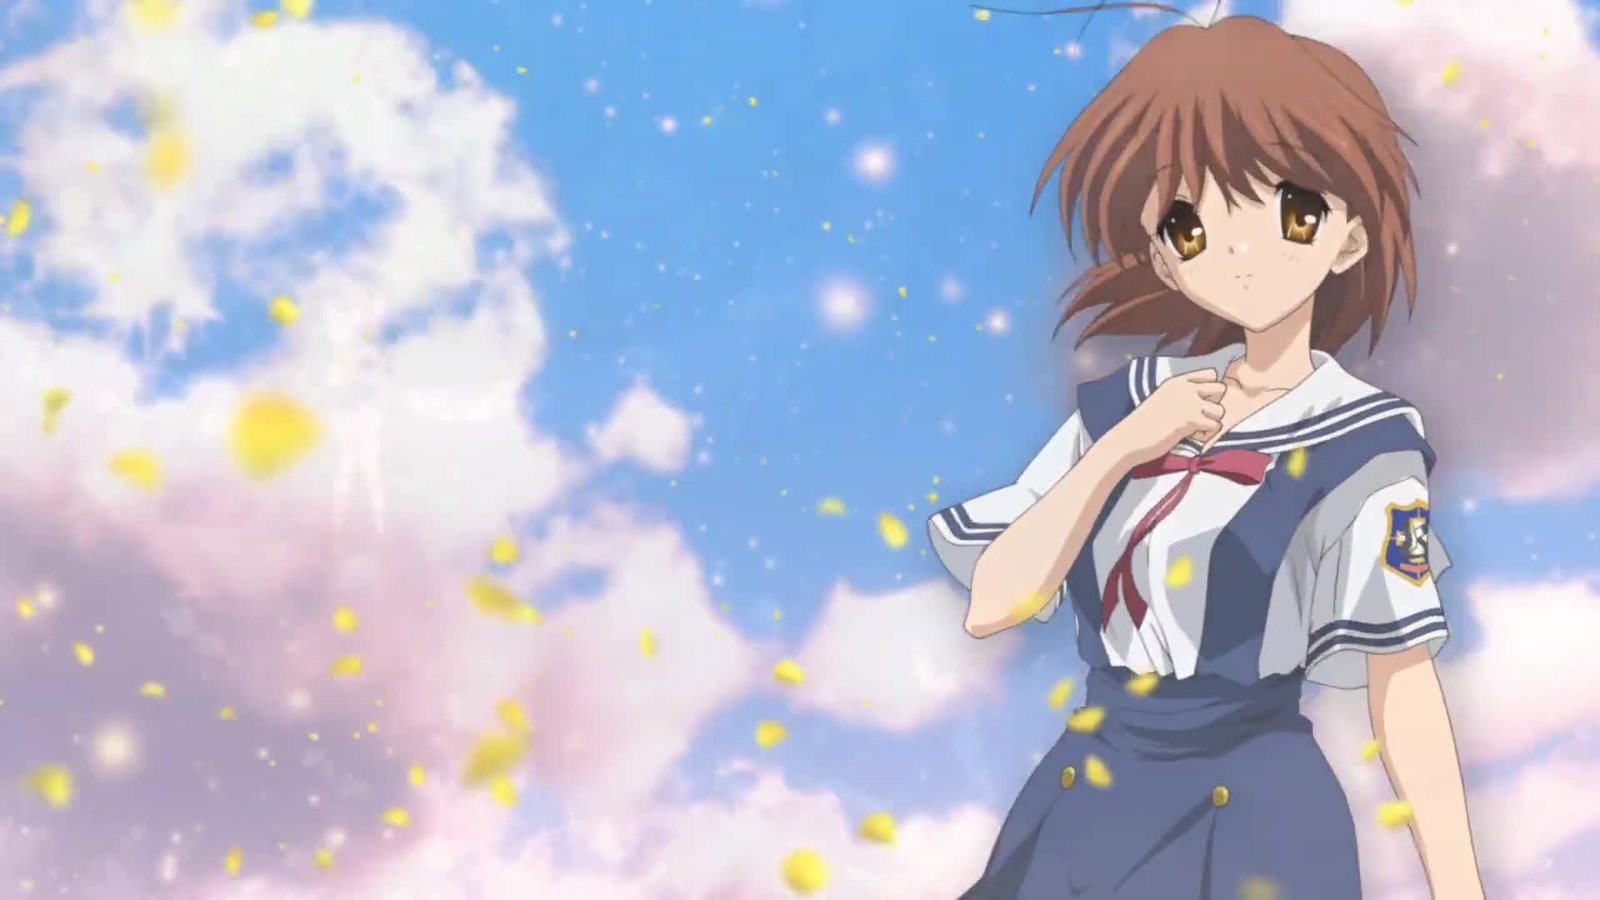 3. Clannad (Town, Flow of Time, People)